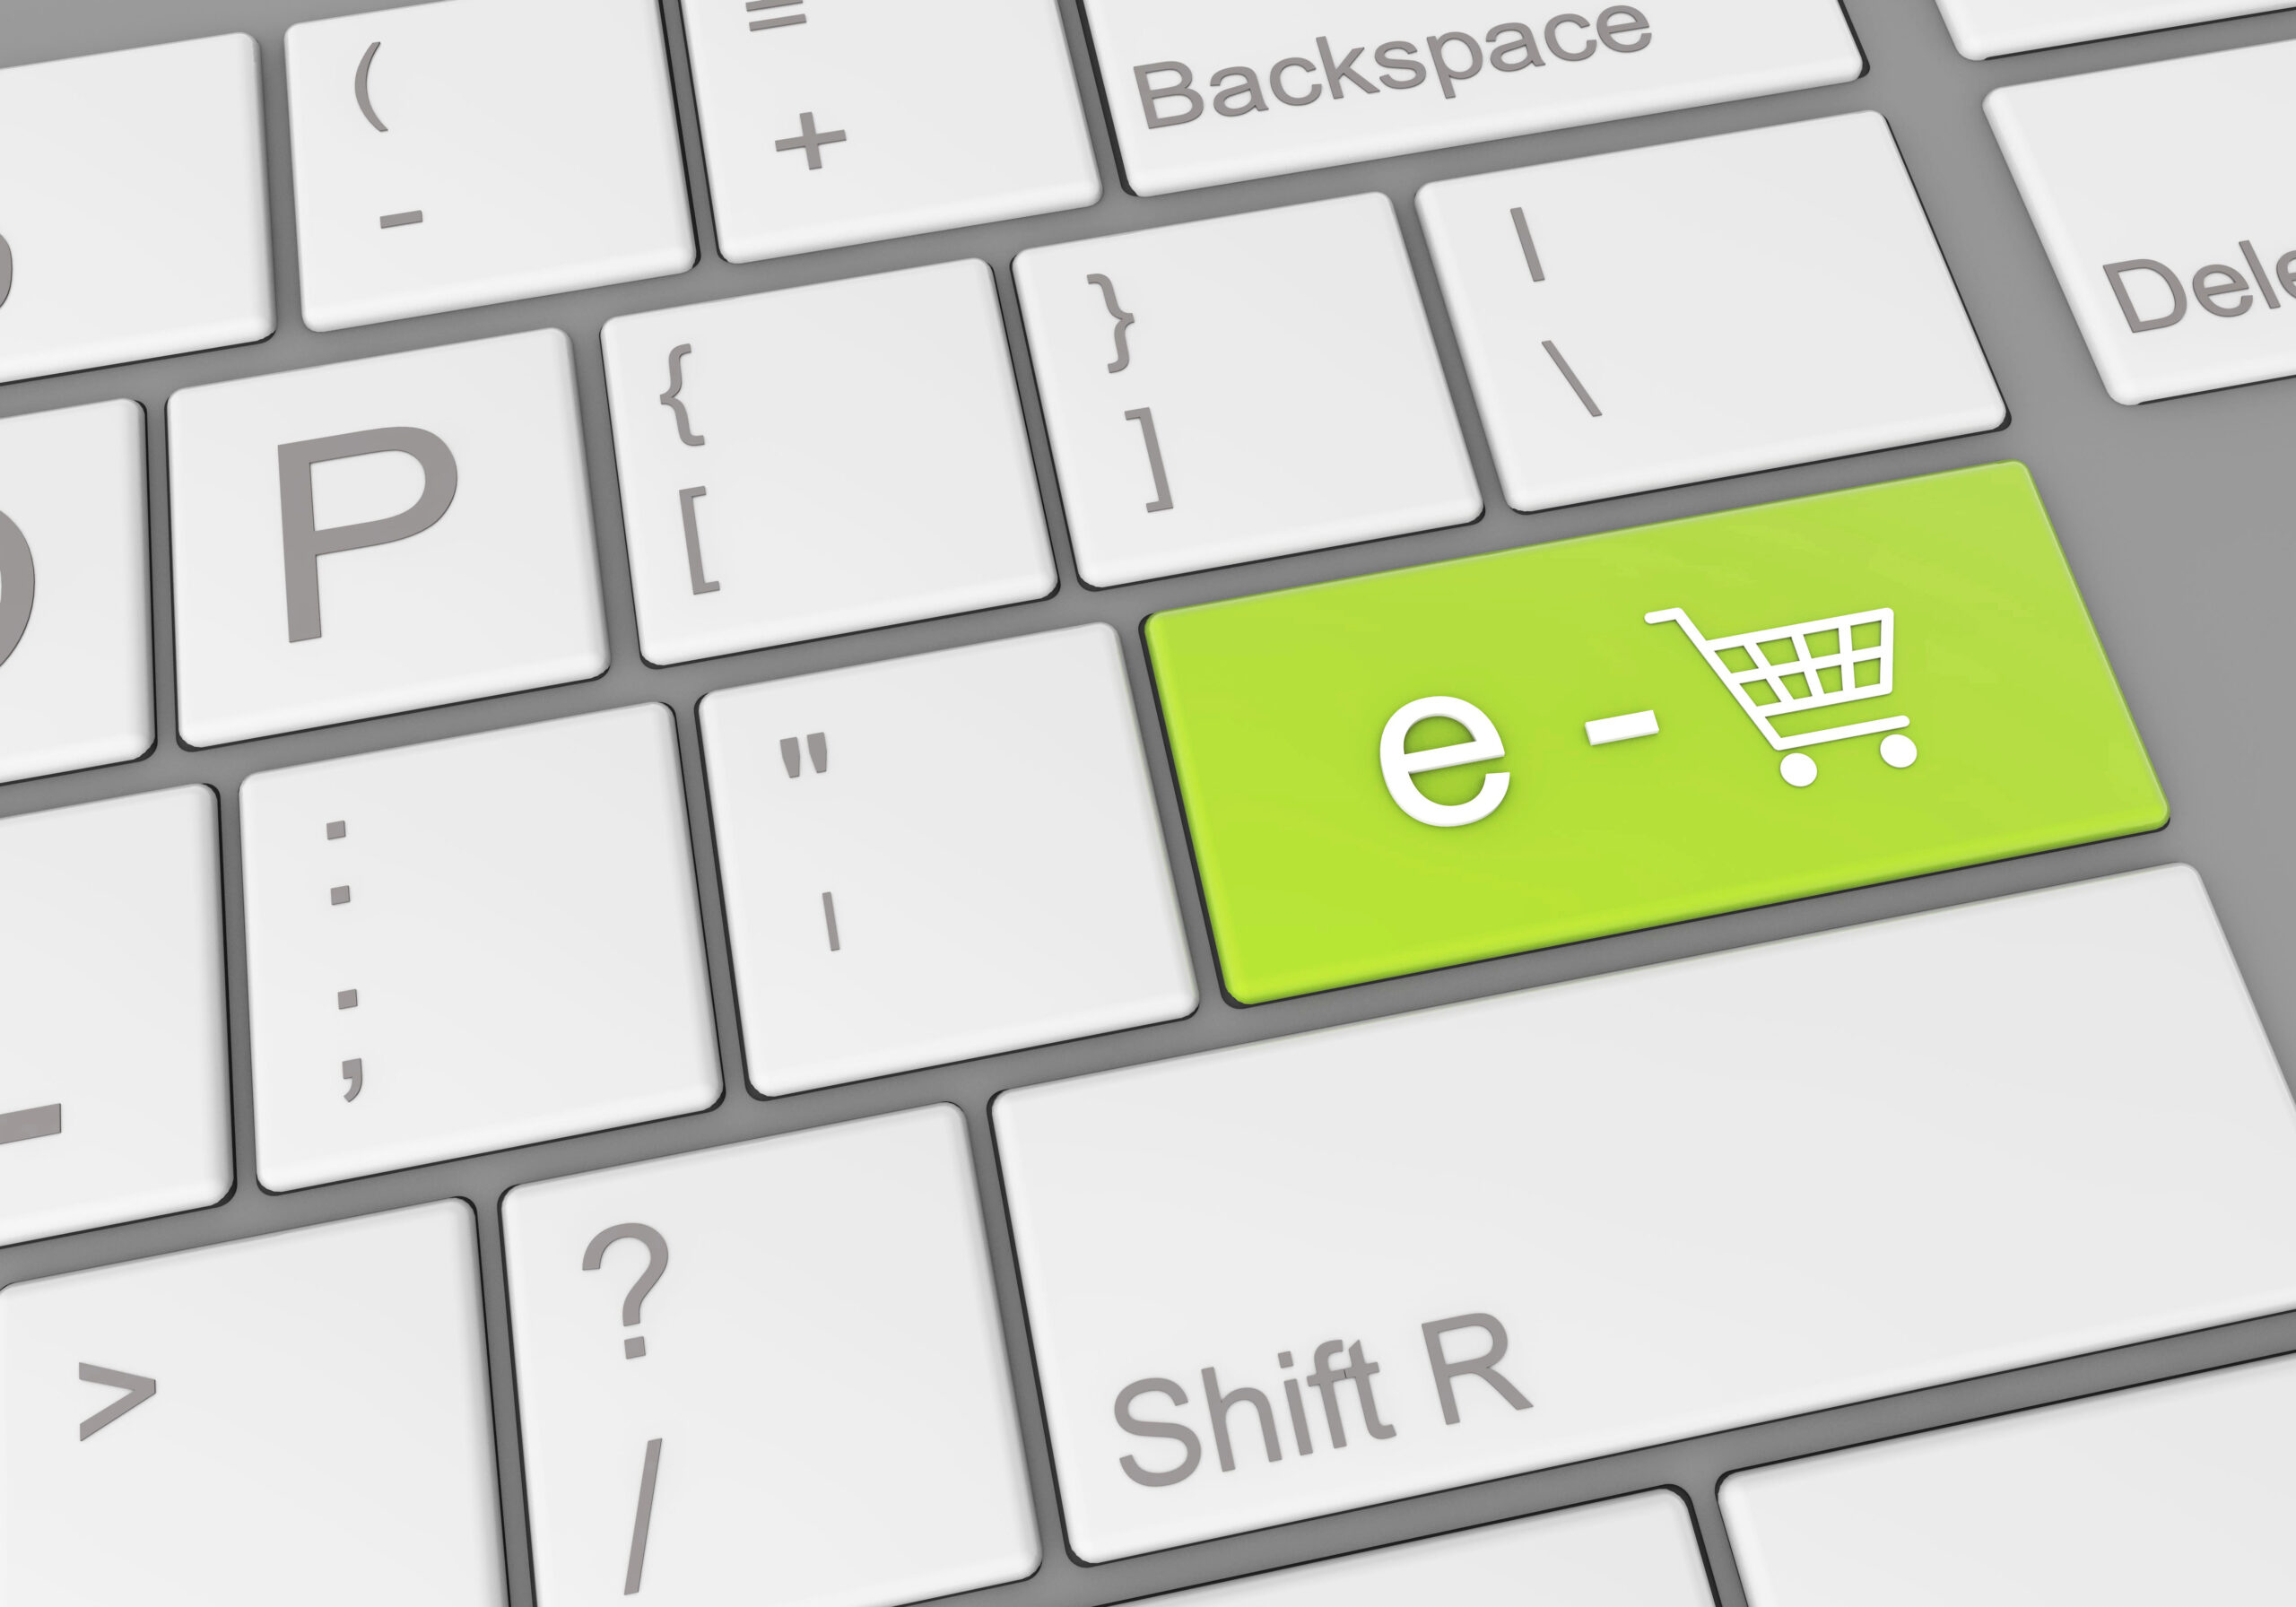 special-e-commerce-button-laptop-keyboard